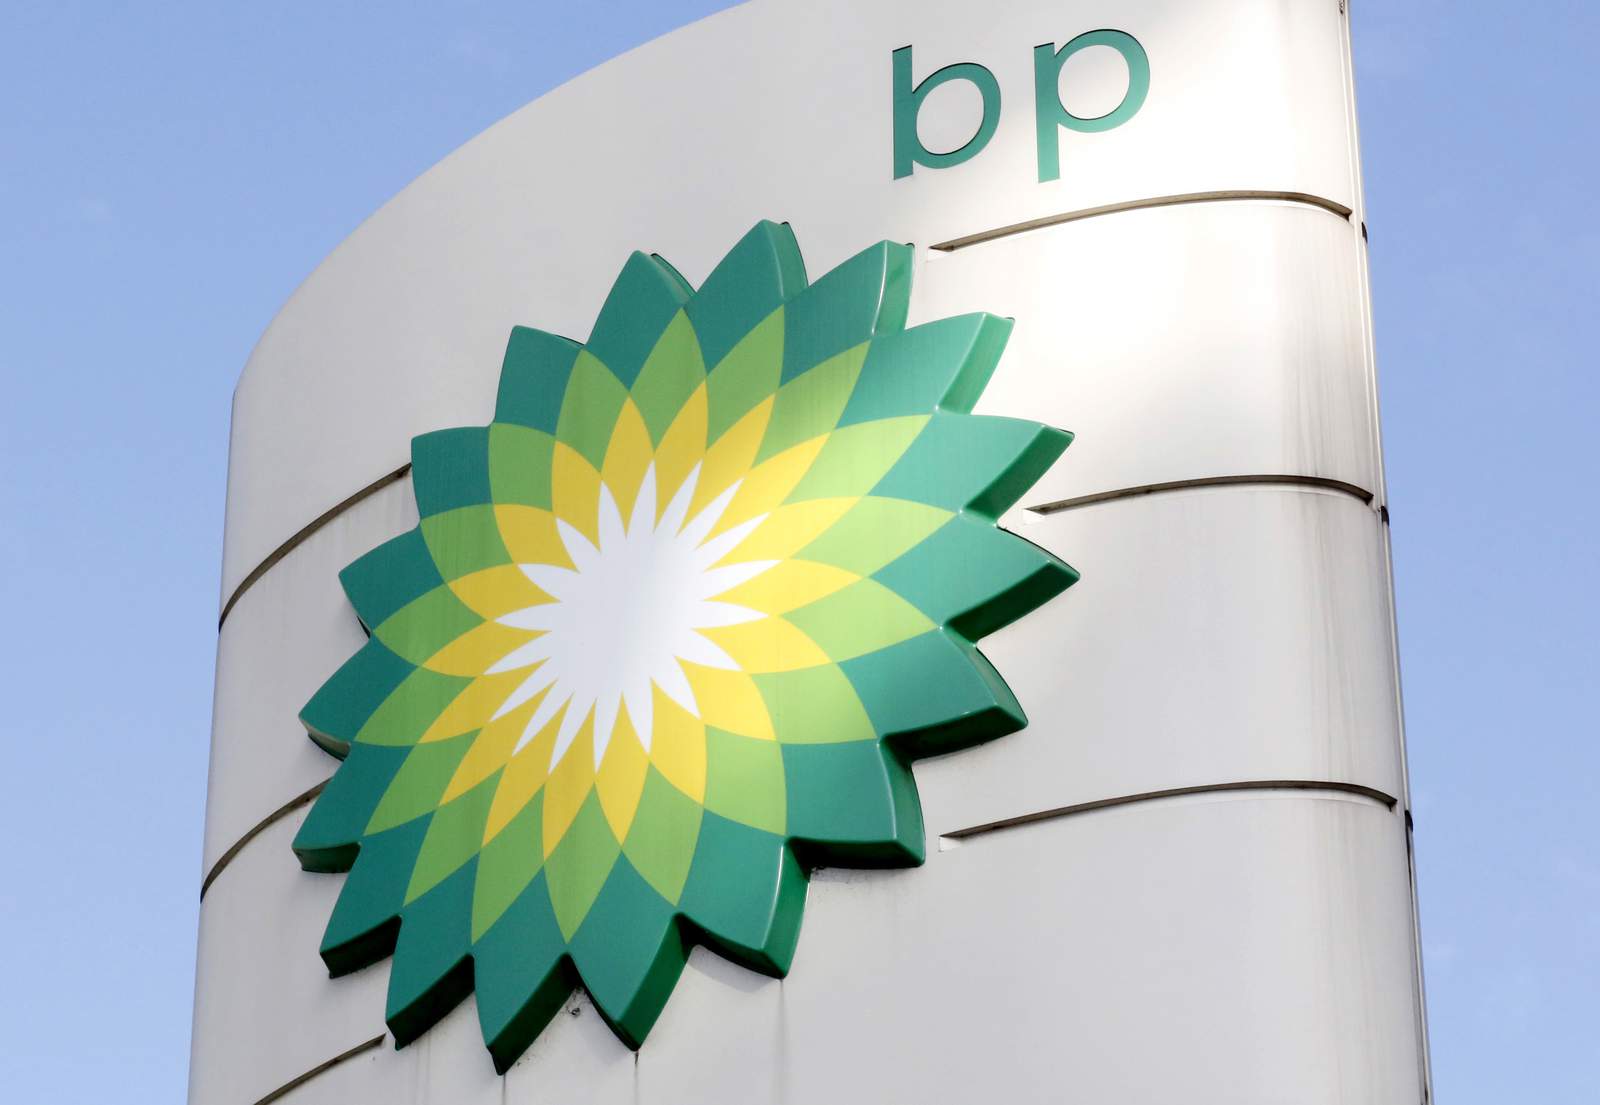 BP sells petrochemicals arm to Ineos for $5 billion